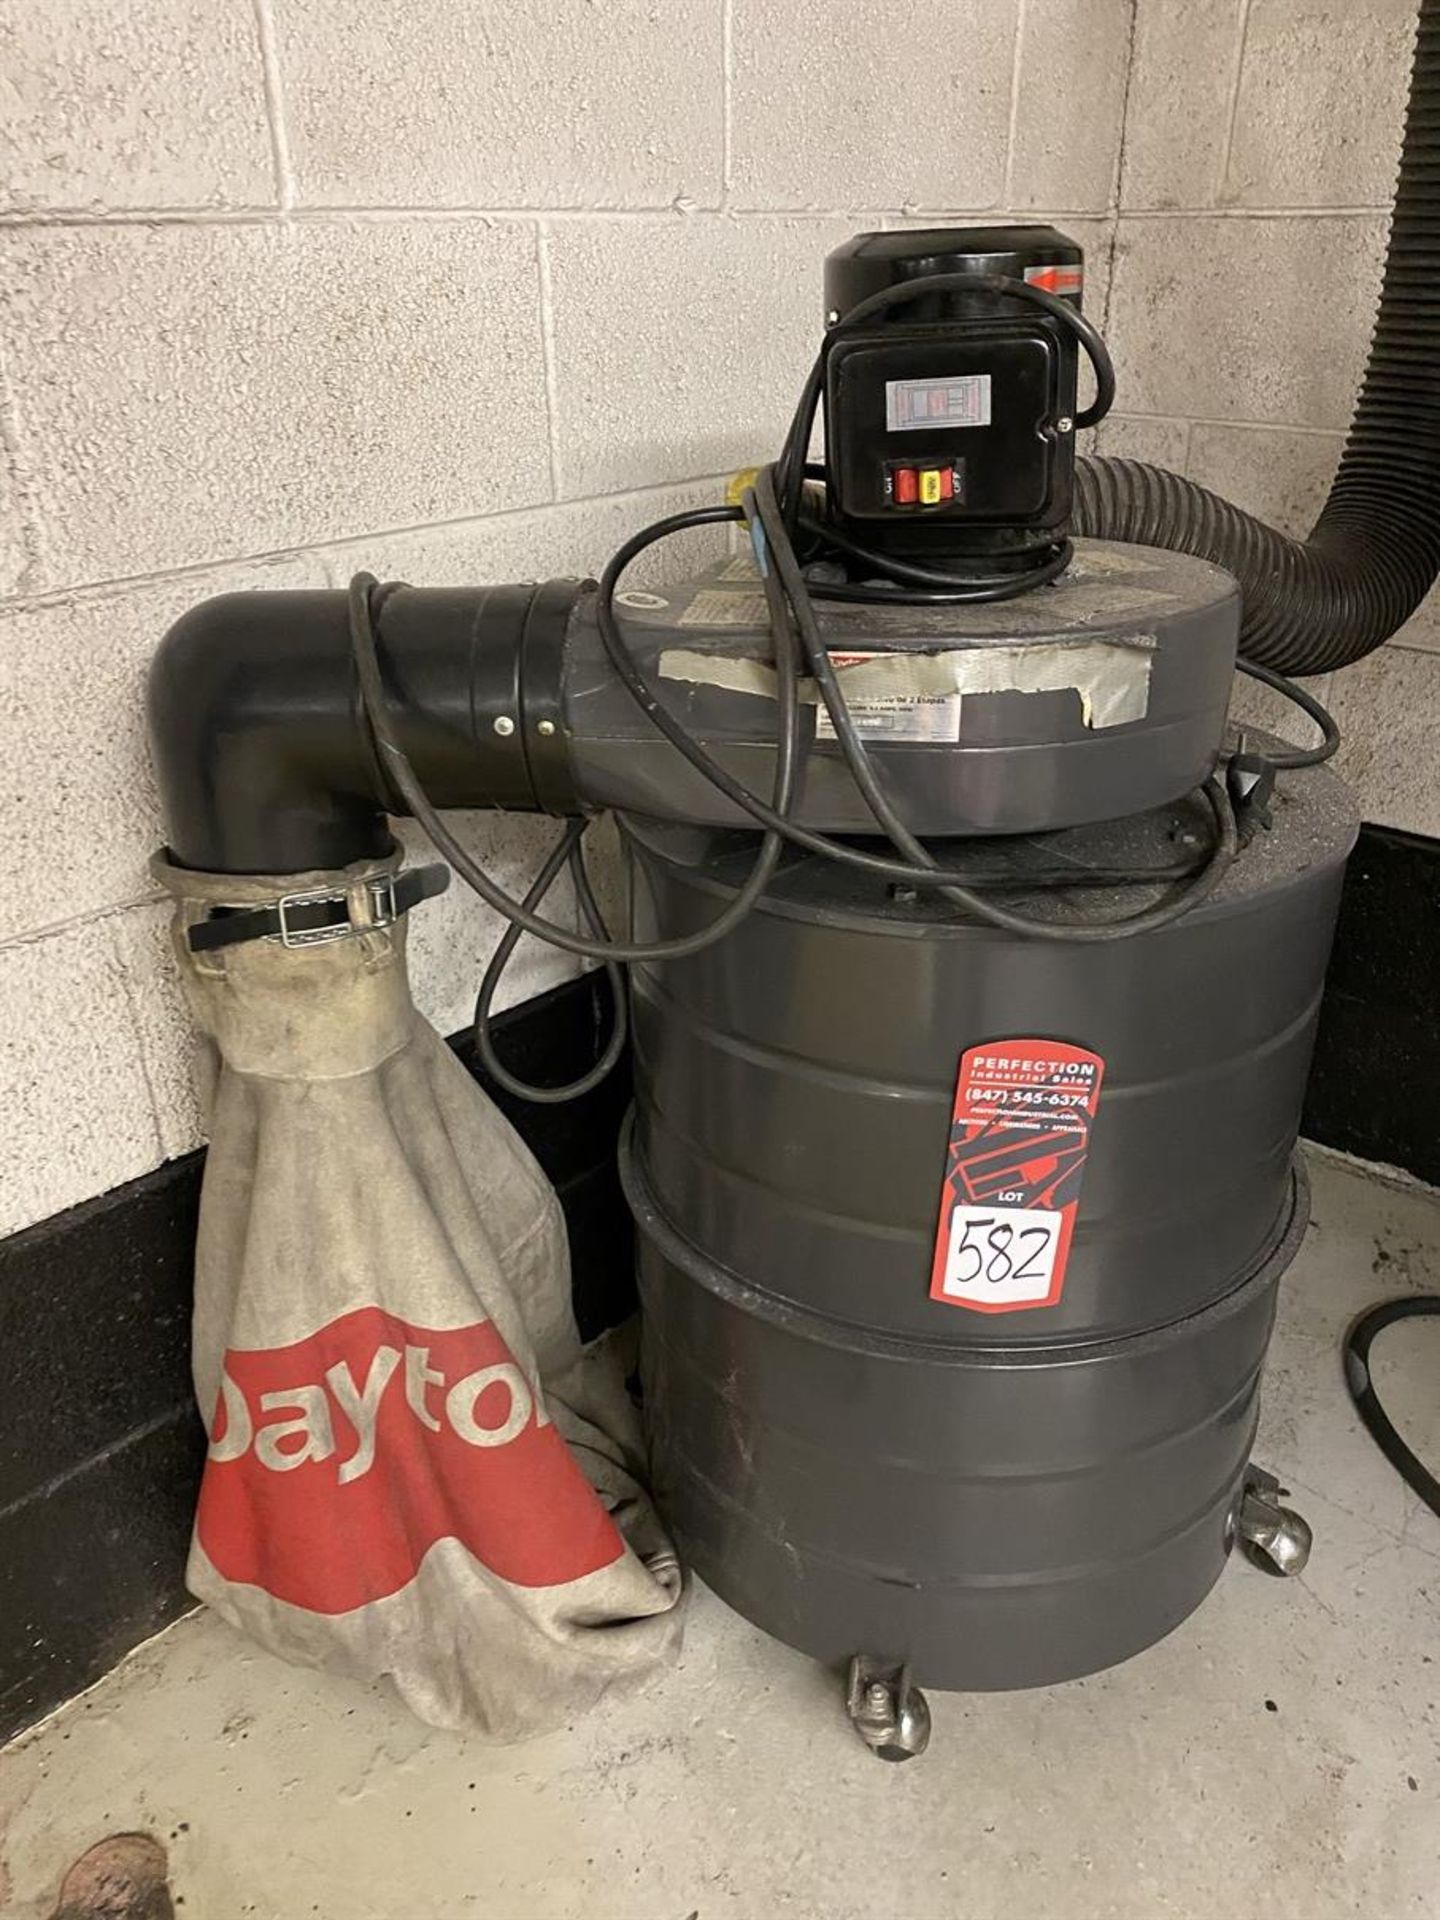 DAYTON 3AA31 2-Stage Dust Collector, s/n 1606, 3/4 HP - Image 2 of 3